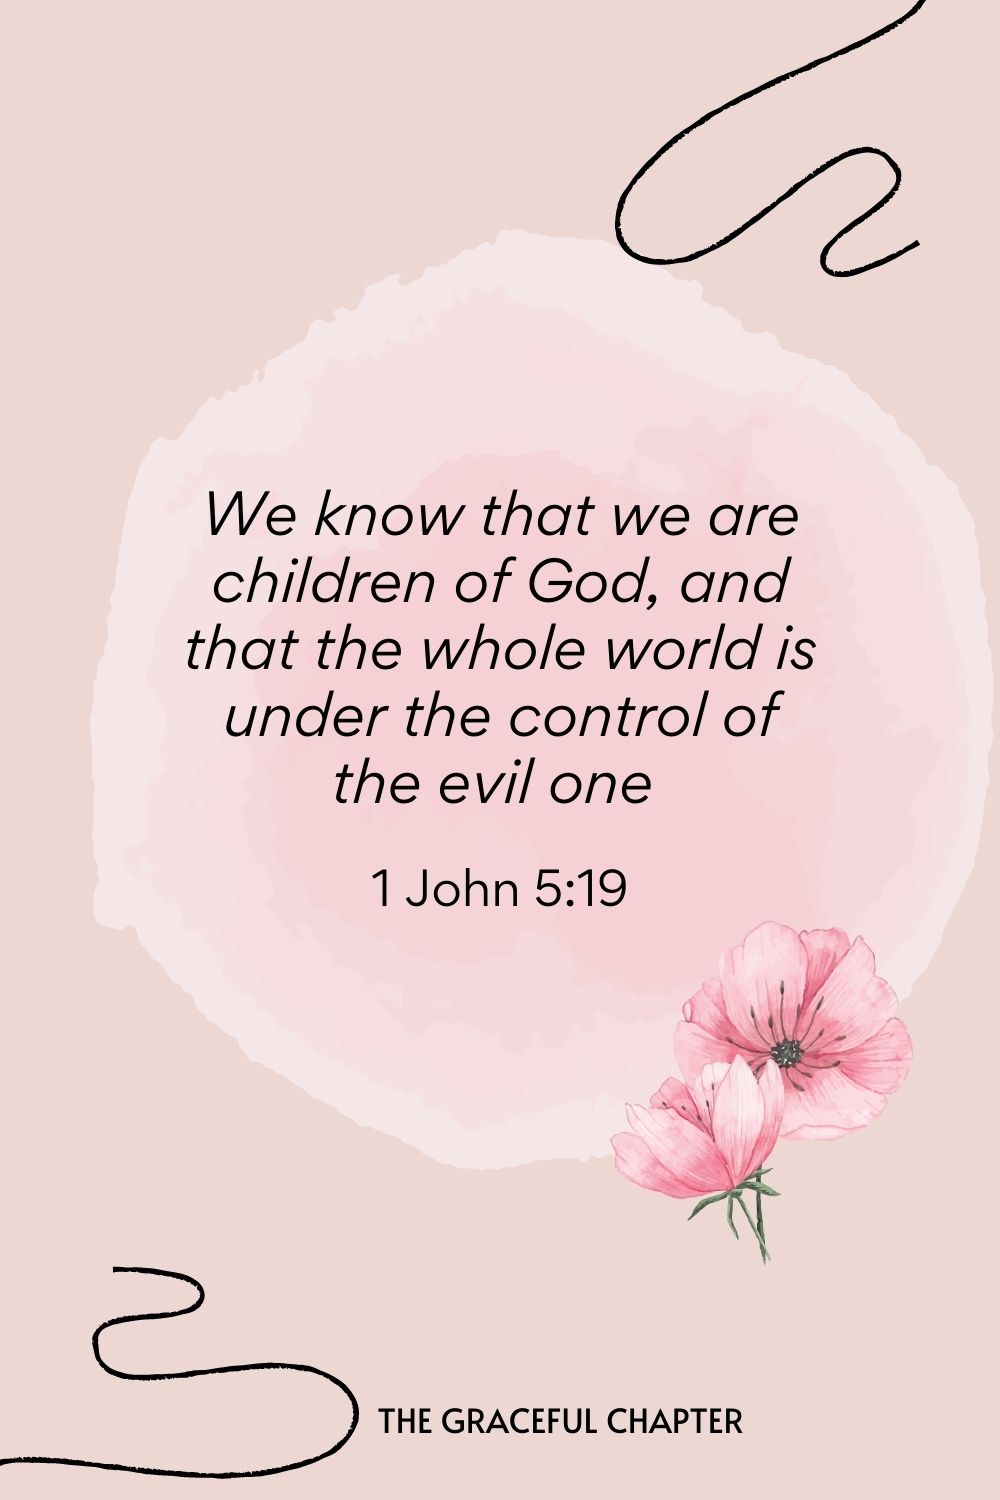 We know that we are children of God, and that the whole world is under the control of the evil one  1 John 5:19